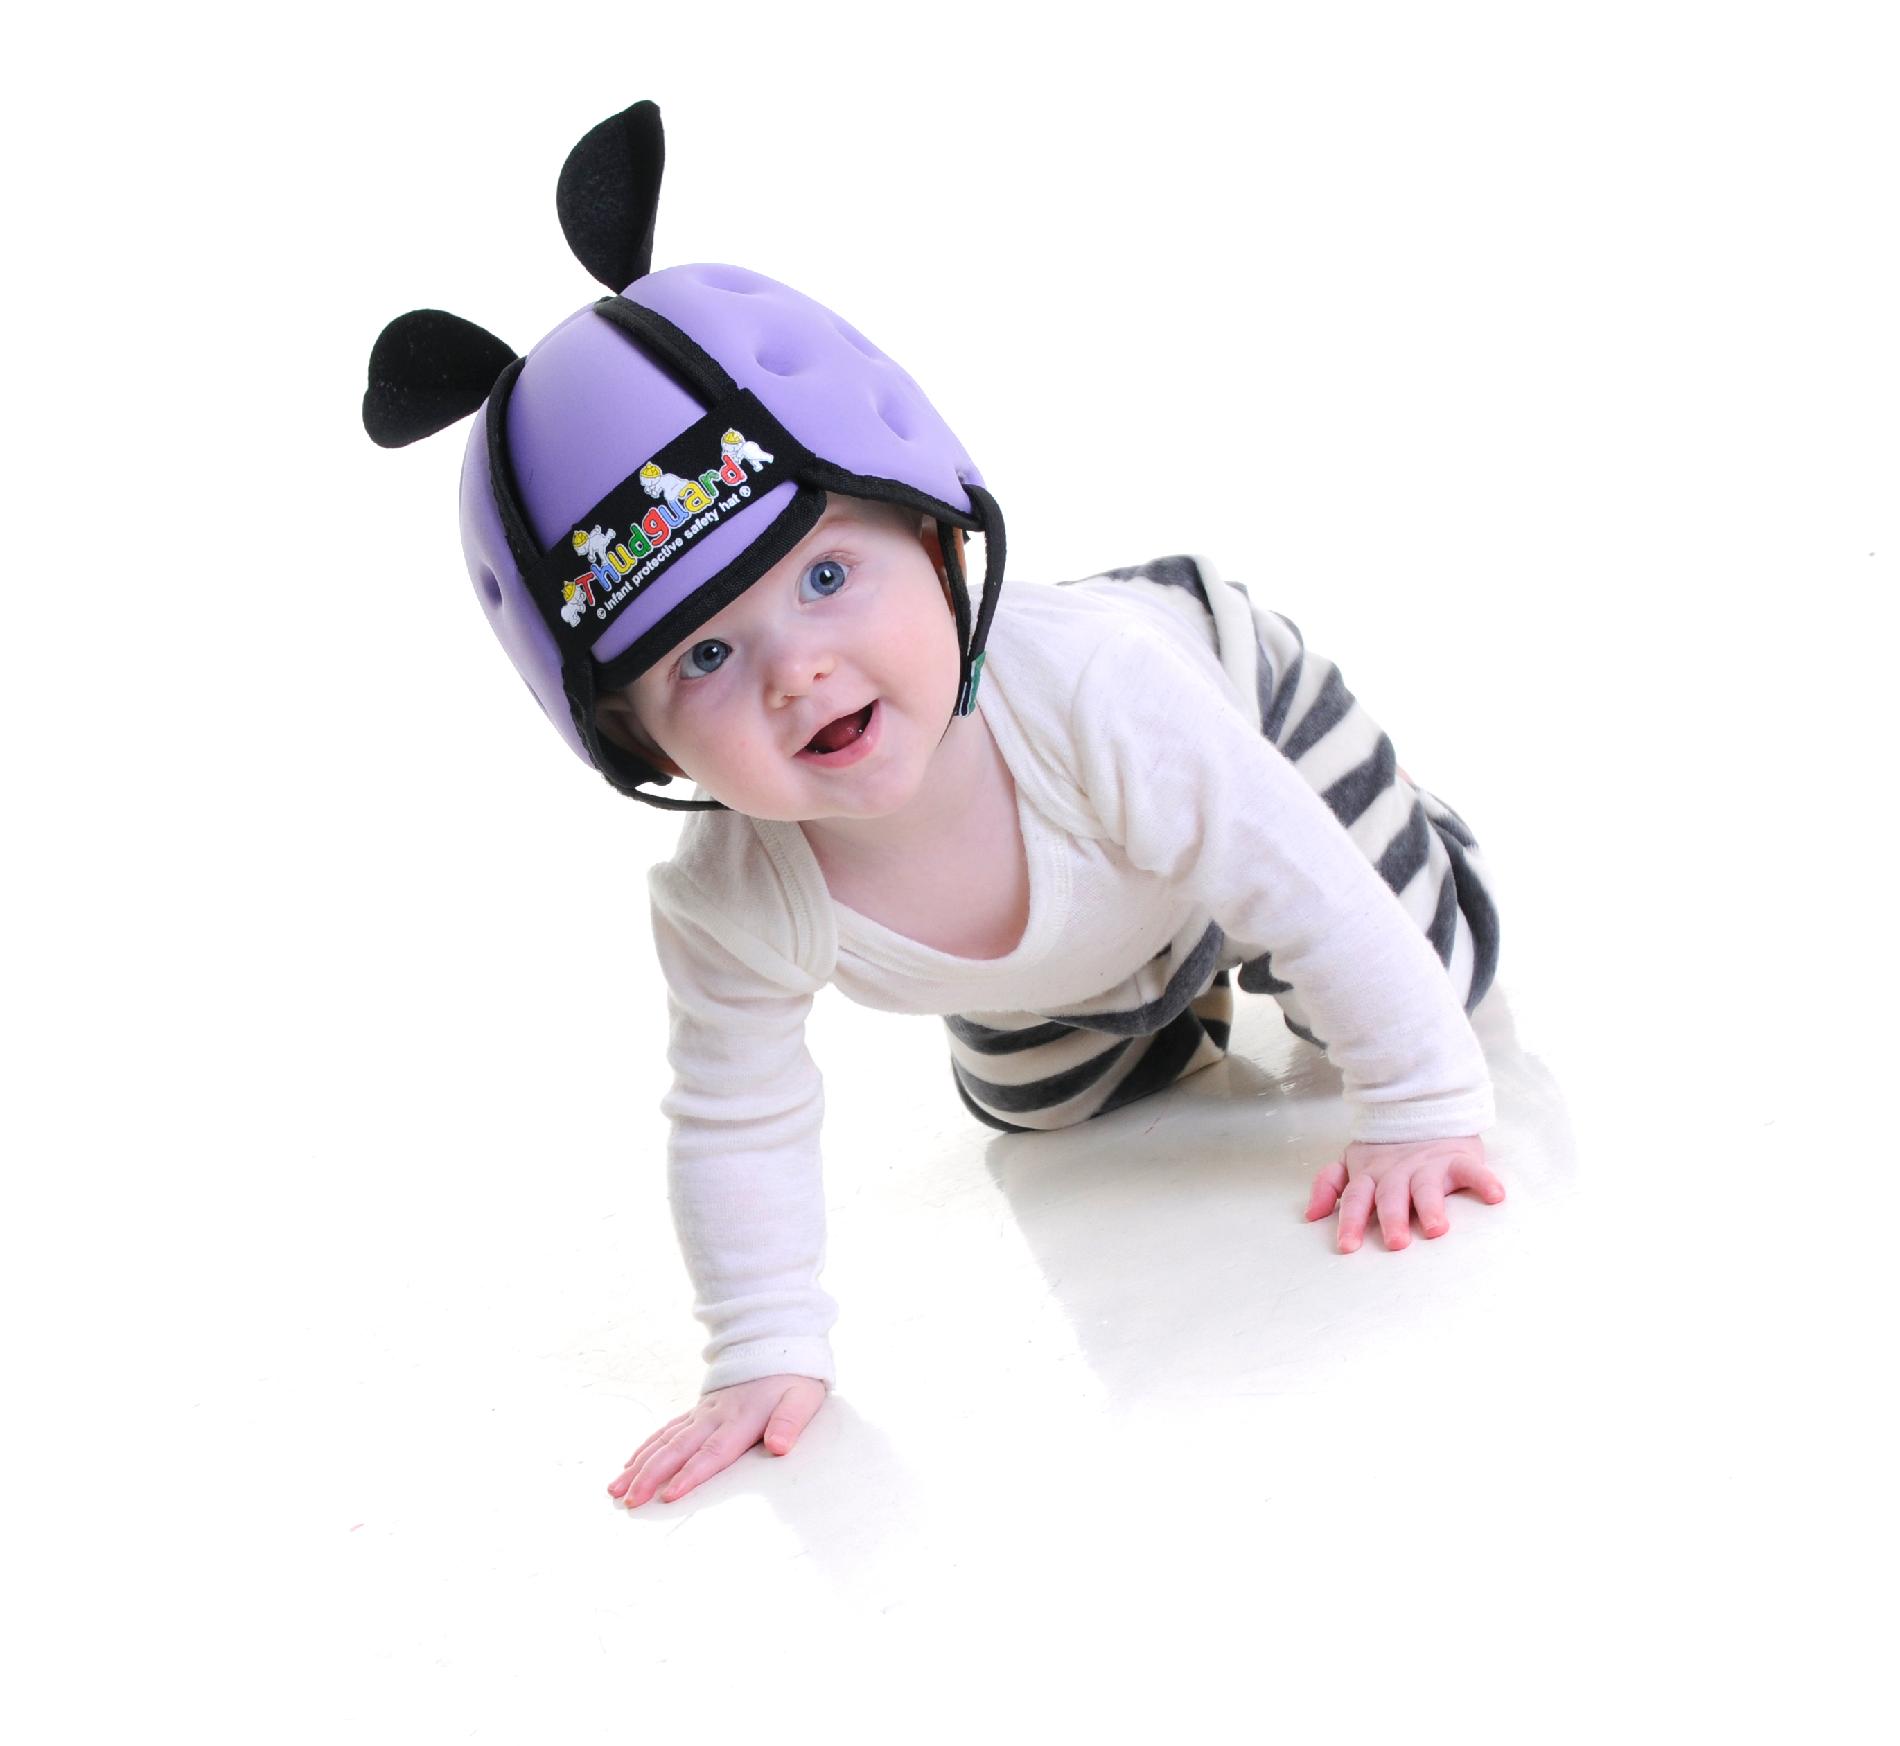 EAN 5060180000110 product image for Baby Safety Helmet Lilac | upcitemdb.com